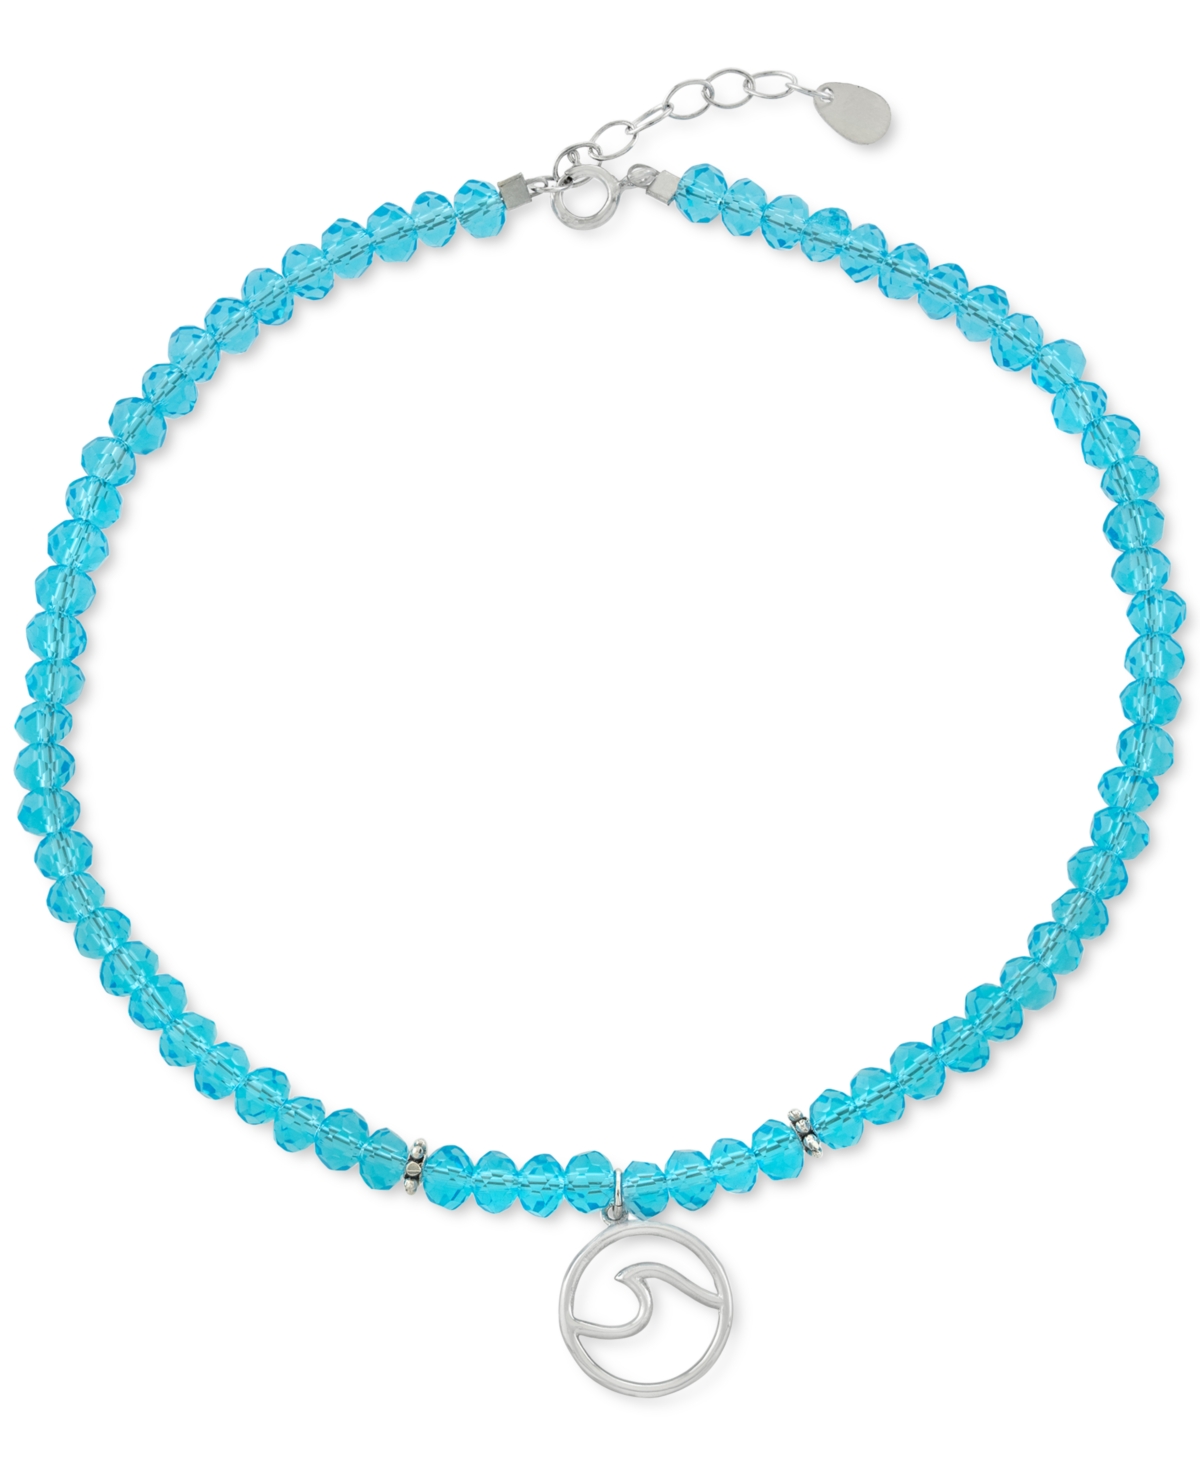 Blue Crystal Bead Wave Charm Ankle Bracelet in Sterling Silver, Created for Macy's - Blue Crystal